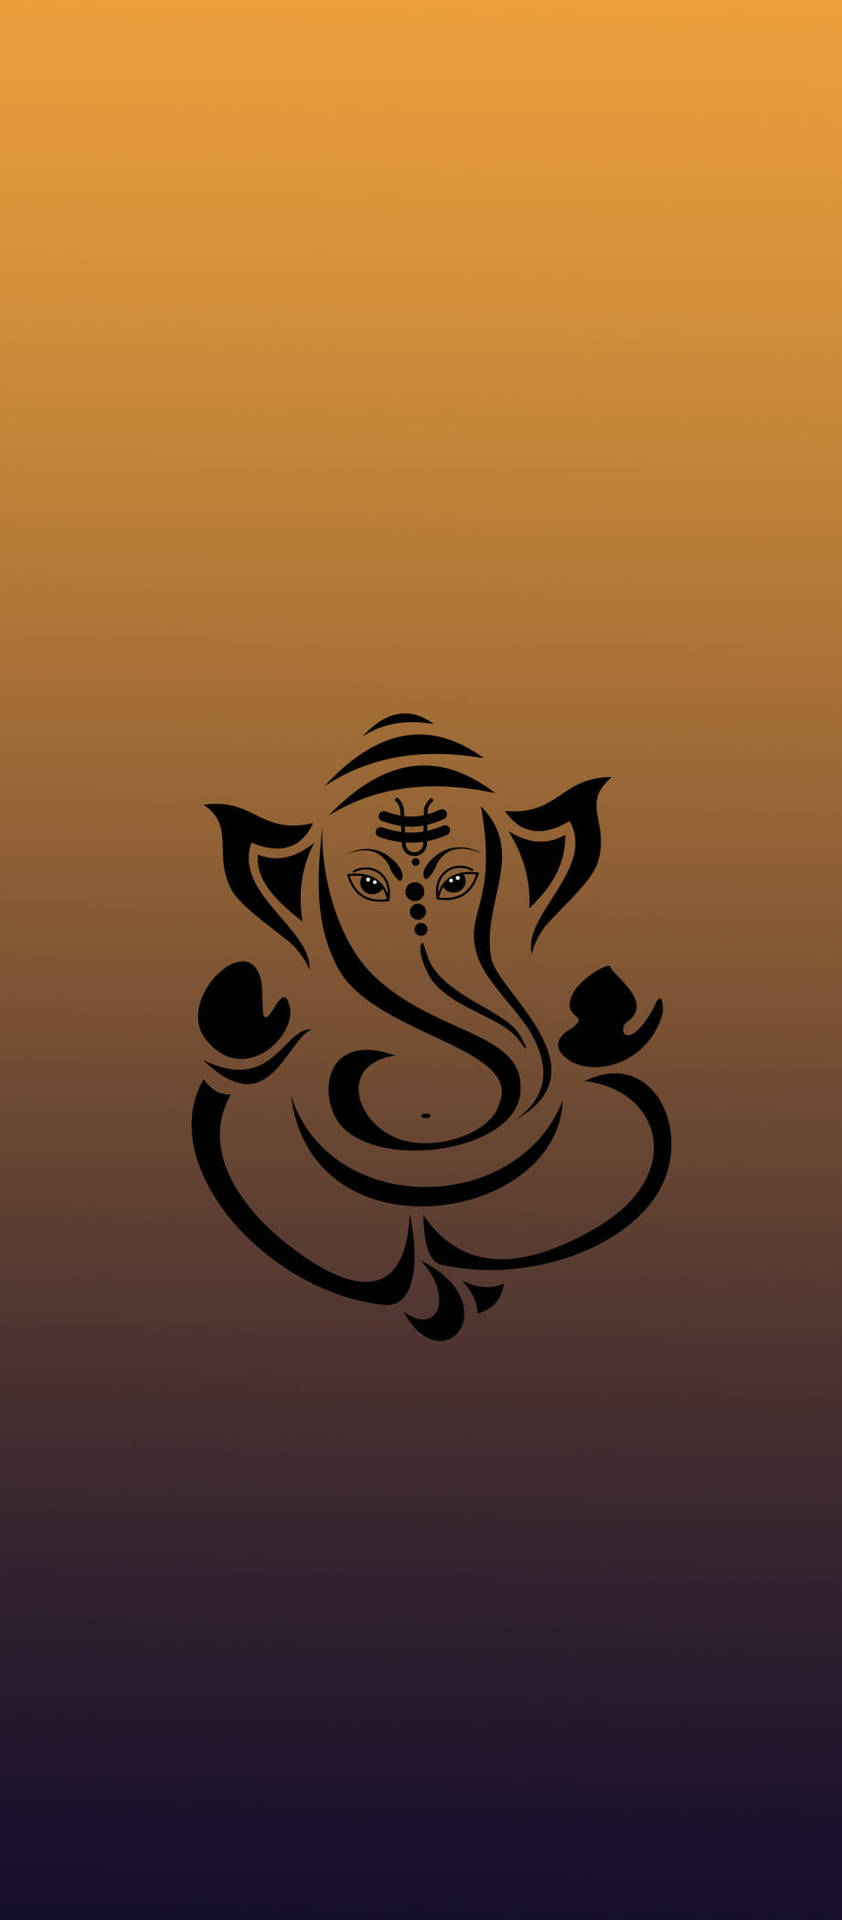 Ganesh Yellow Black Ombre Iphone Background